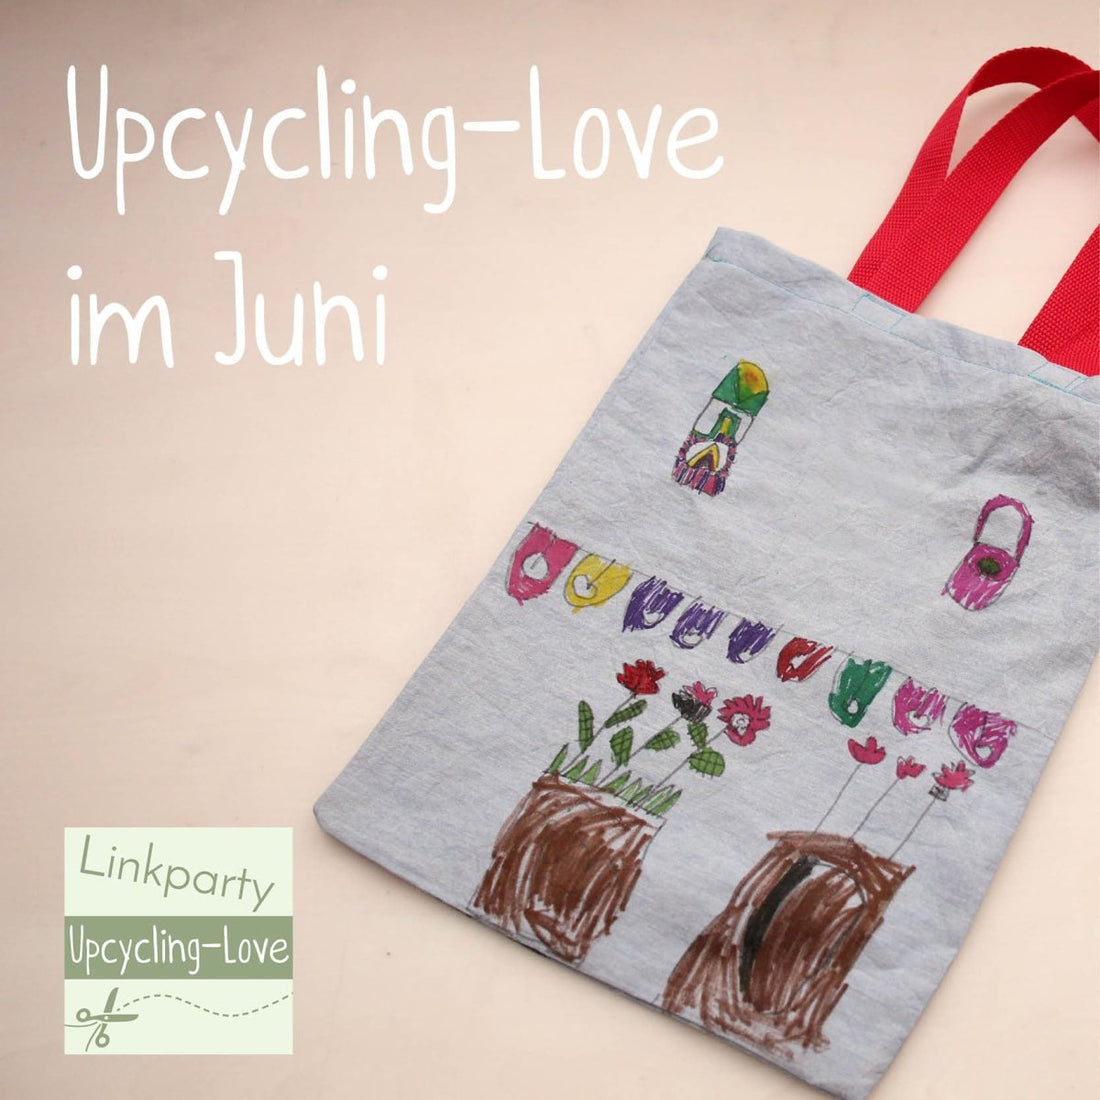 Upcycling-Love Linkparty #3